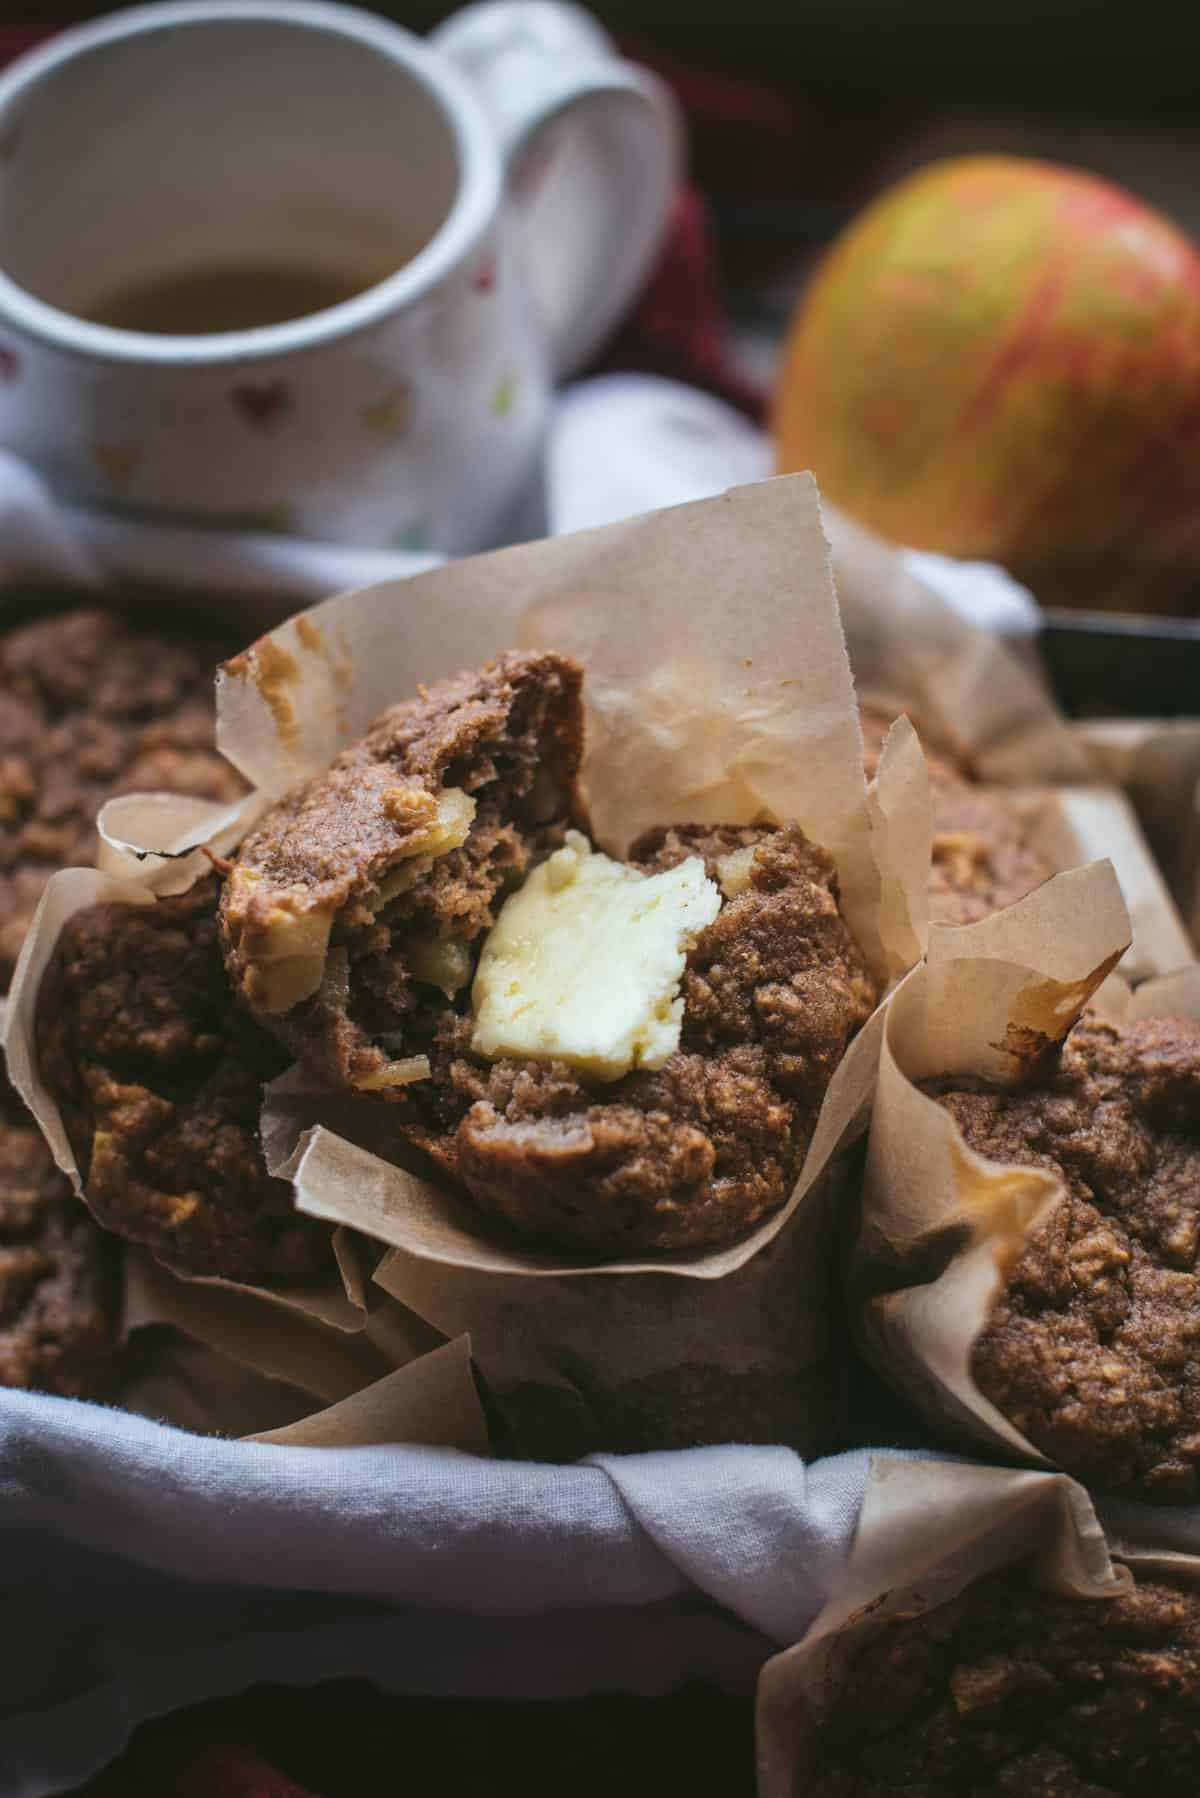 A pile of apple muffins lined in brown papers in a cloth lined container. One of the muffins has been broken in half and a chunk of butter is on top of it.